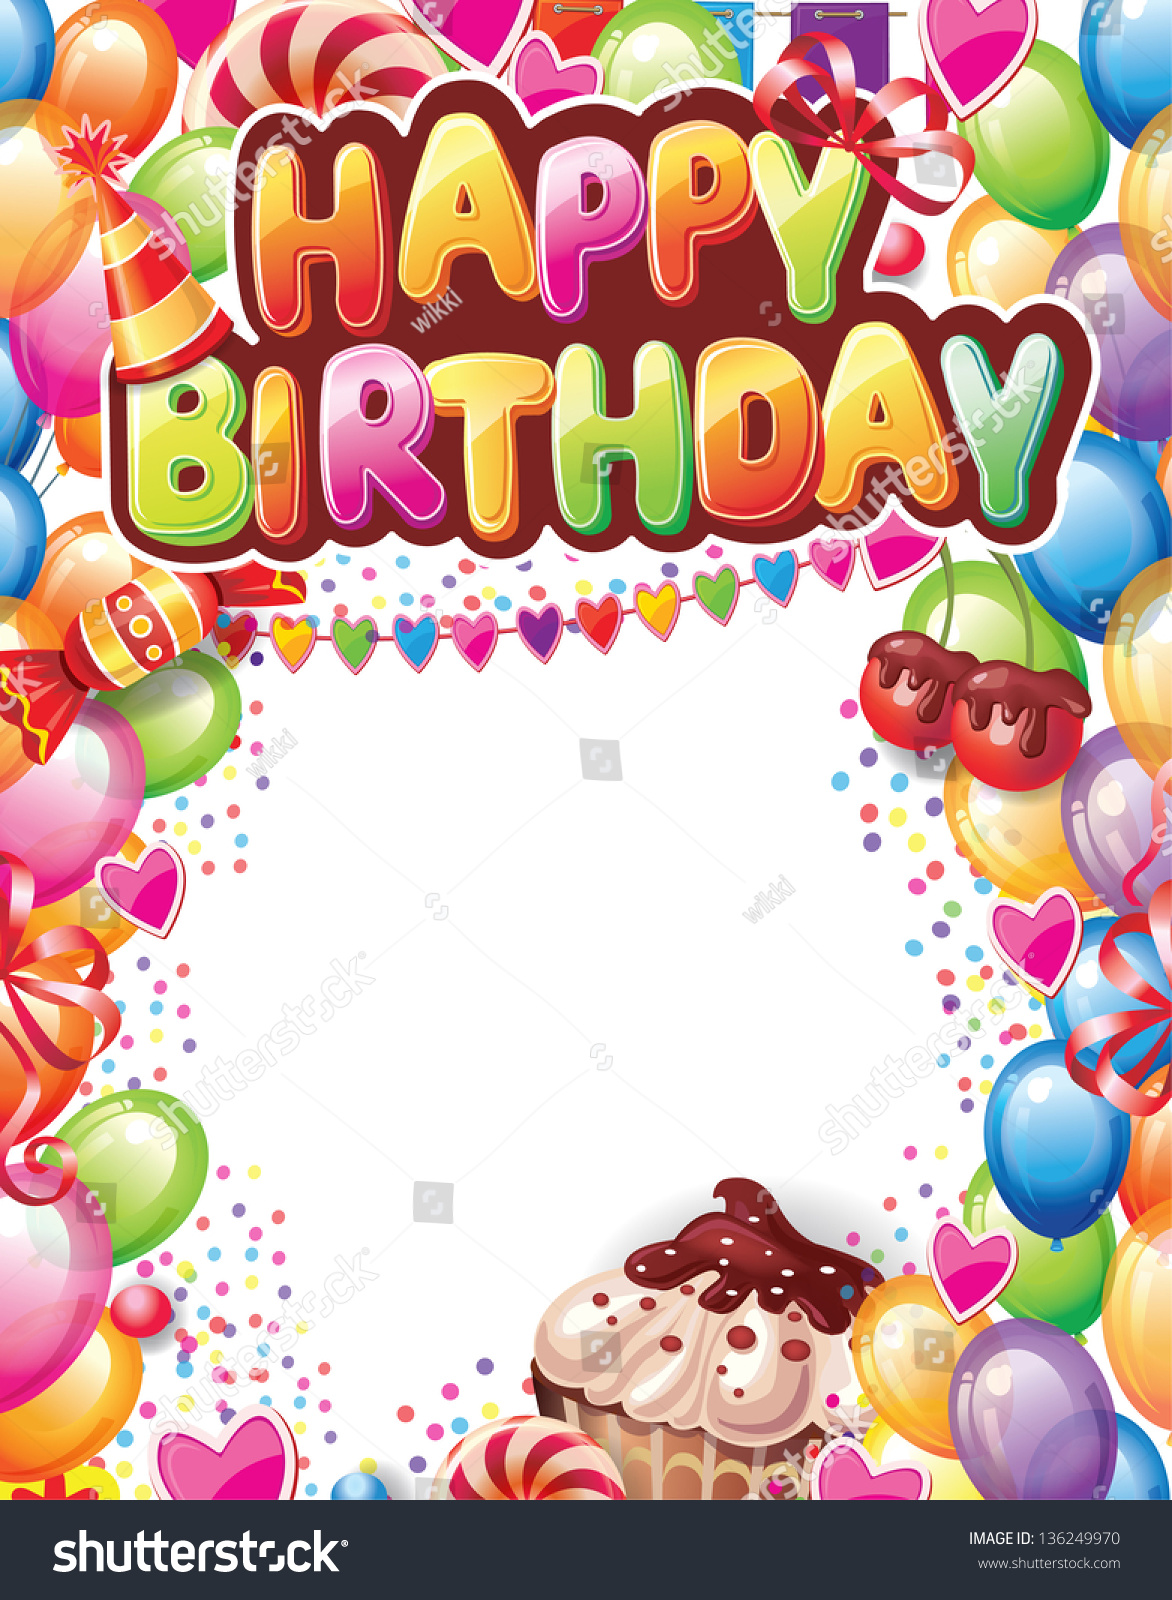 Template For Happy Birthday Card Stock Vector Illustration 136249970 ...